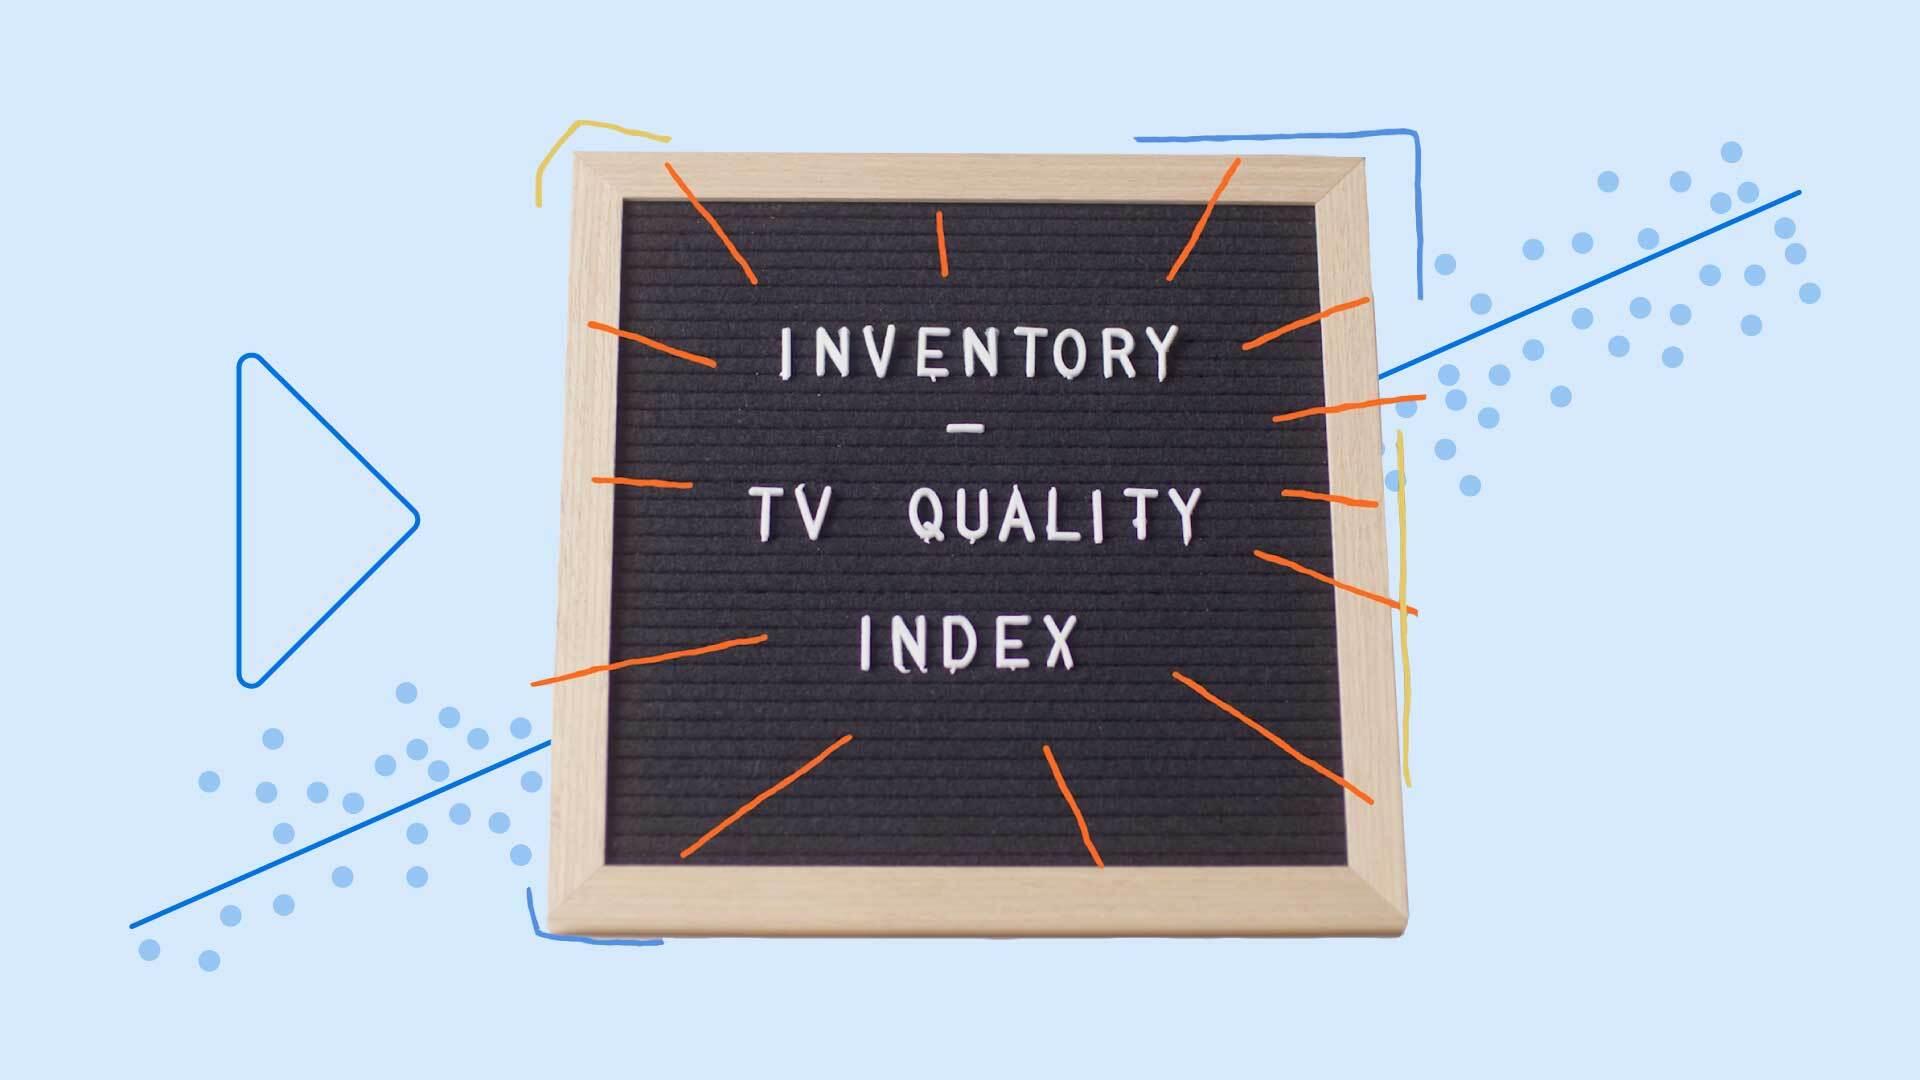 A letter board reads "Inventory - TV Quality Index"